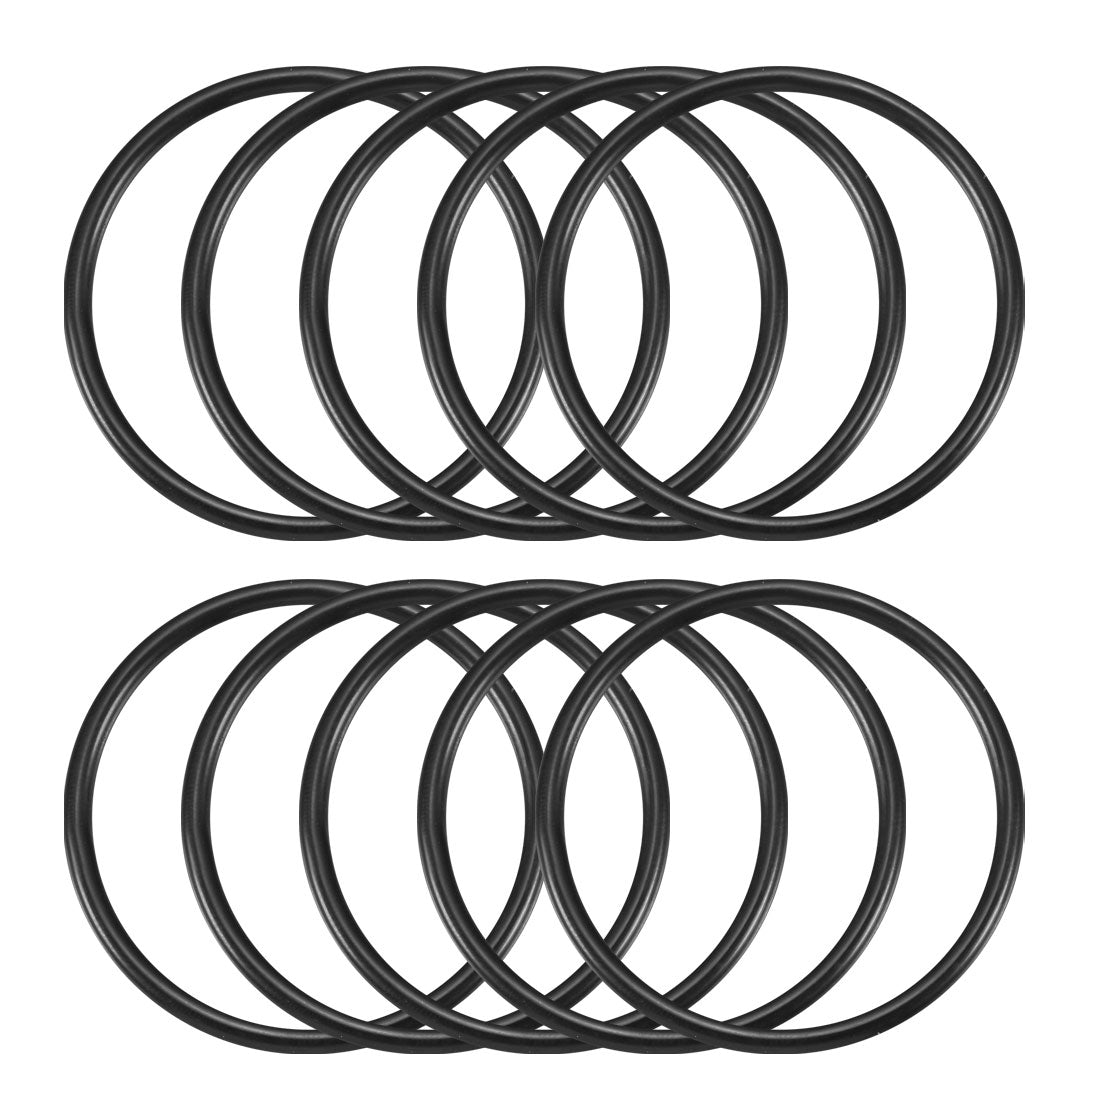 uxcell Uxcell 10Pcs 50x3mm Black Flexible O Rings Washer Gasket Grommets Rubber Sealing